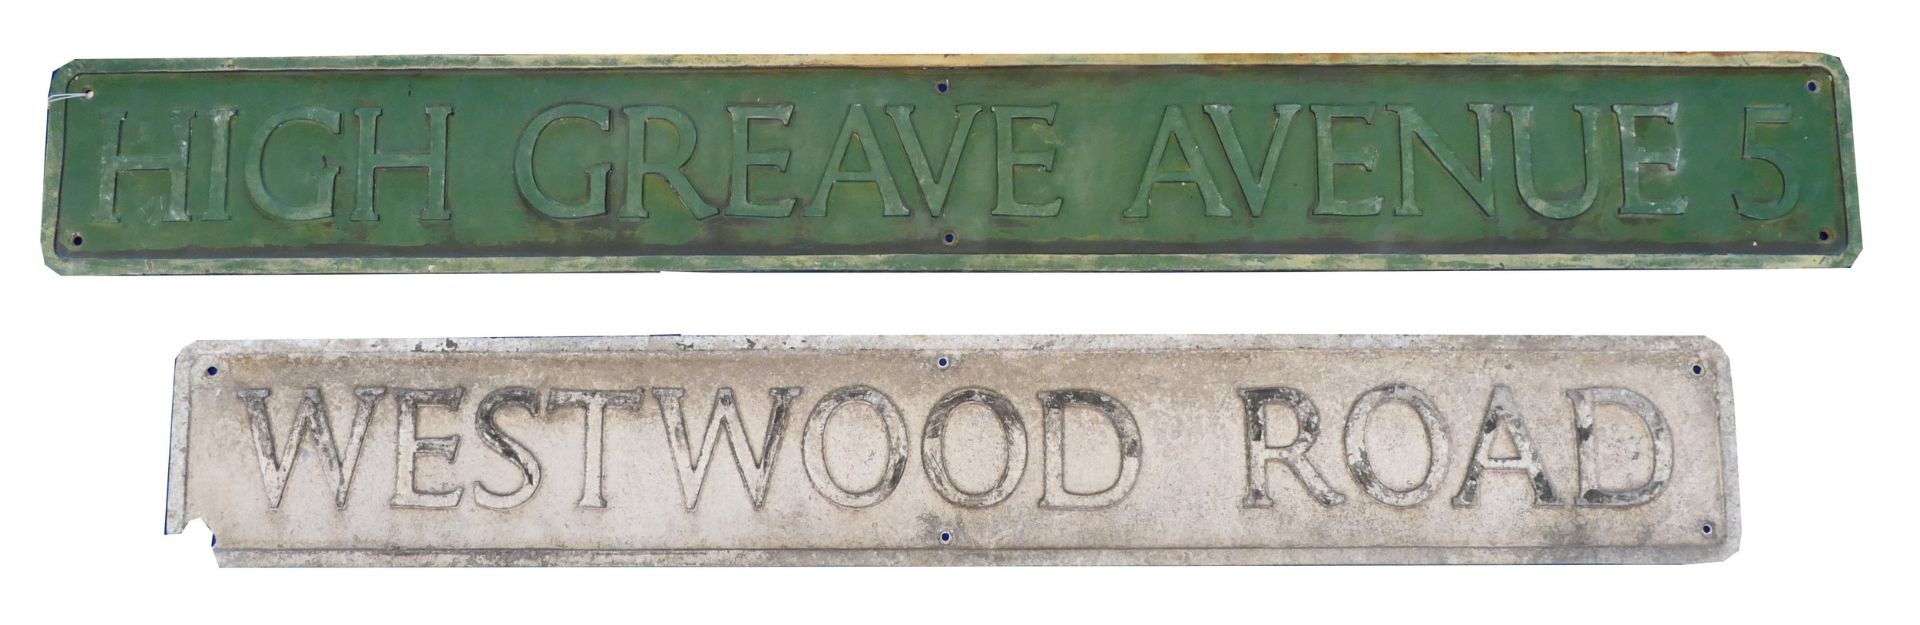 Two 1950's cast aluminium street signs, High Greave Street, 18 x 144cm, Westwood Road, 18 x 122cm.